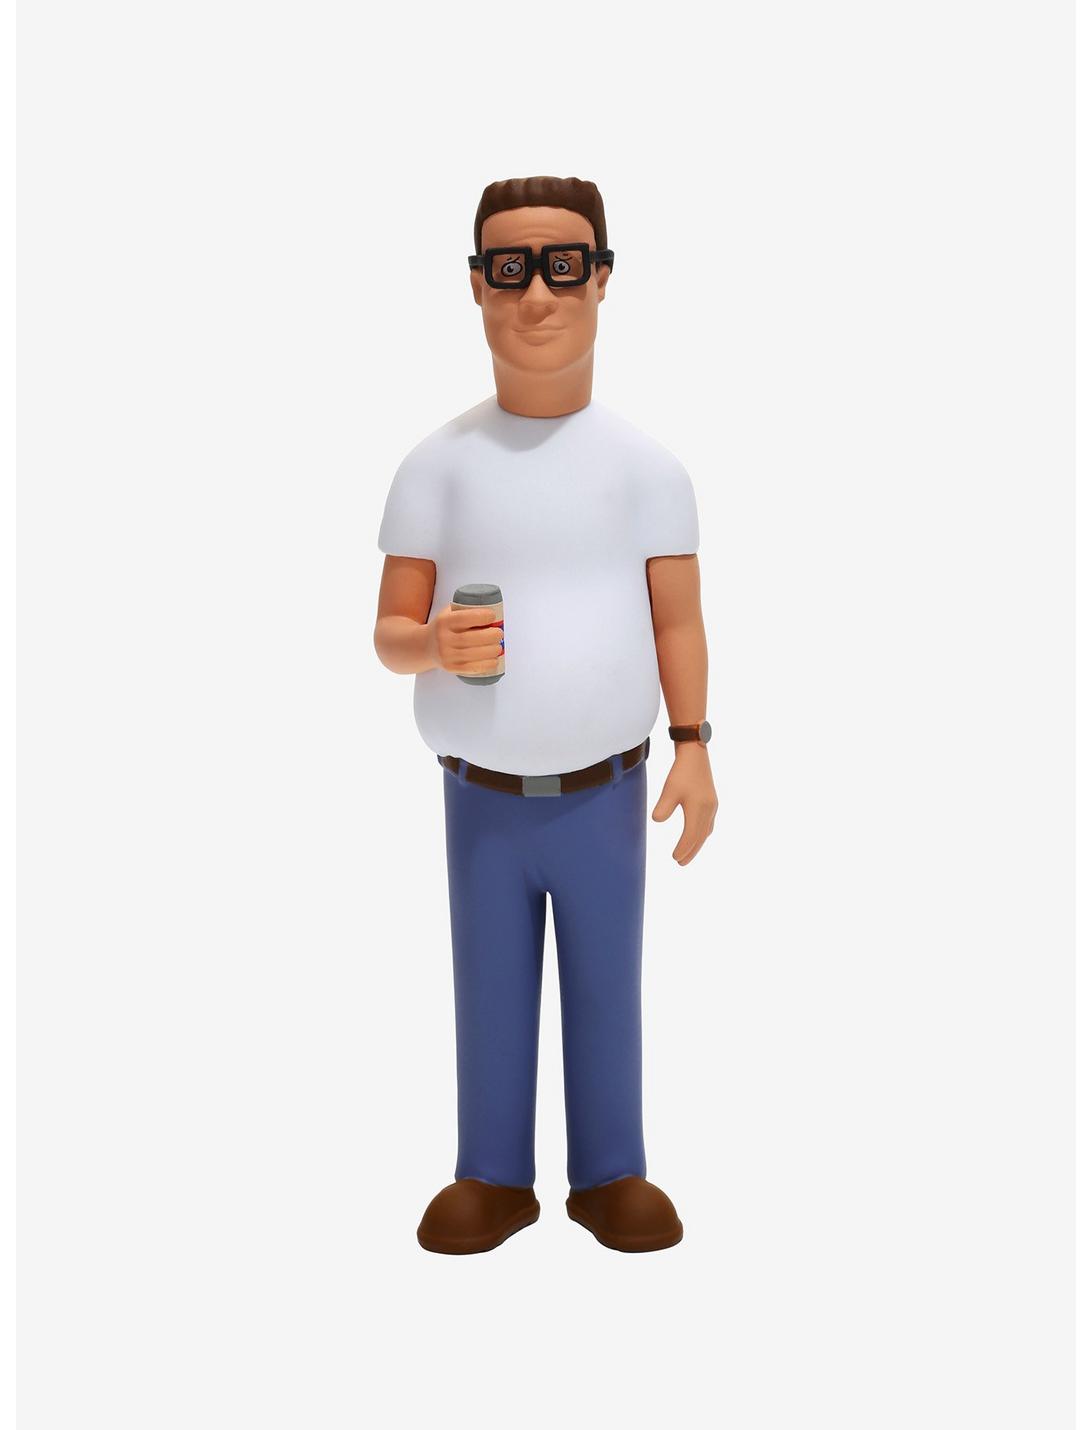 King Of The Hill Hank Hill Collectible Figure, , hi-res